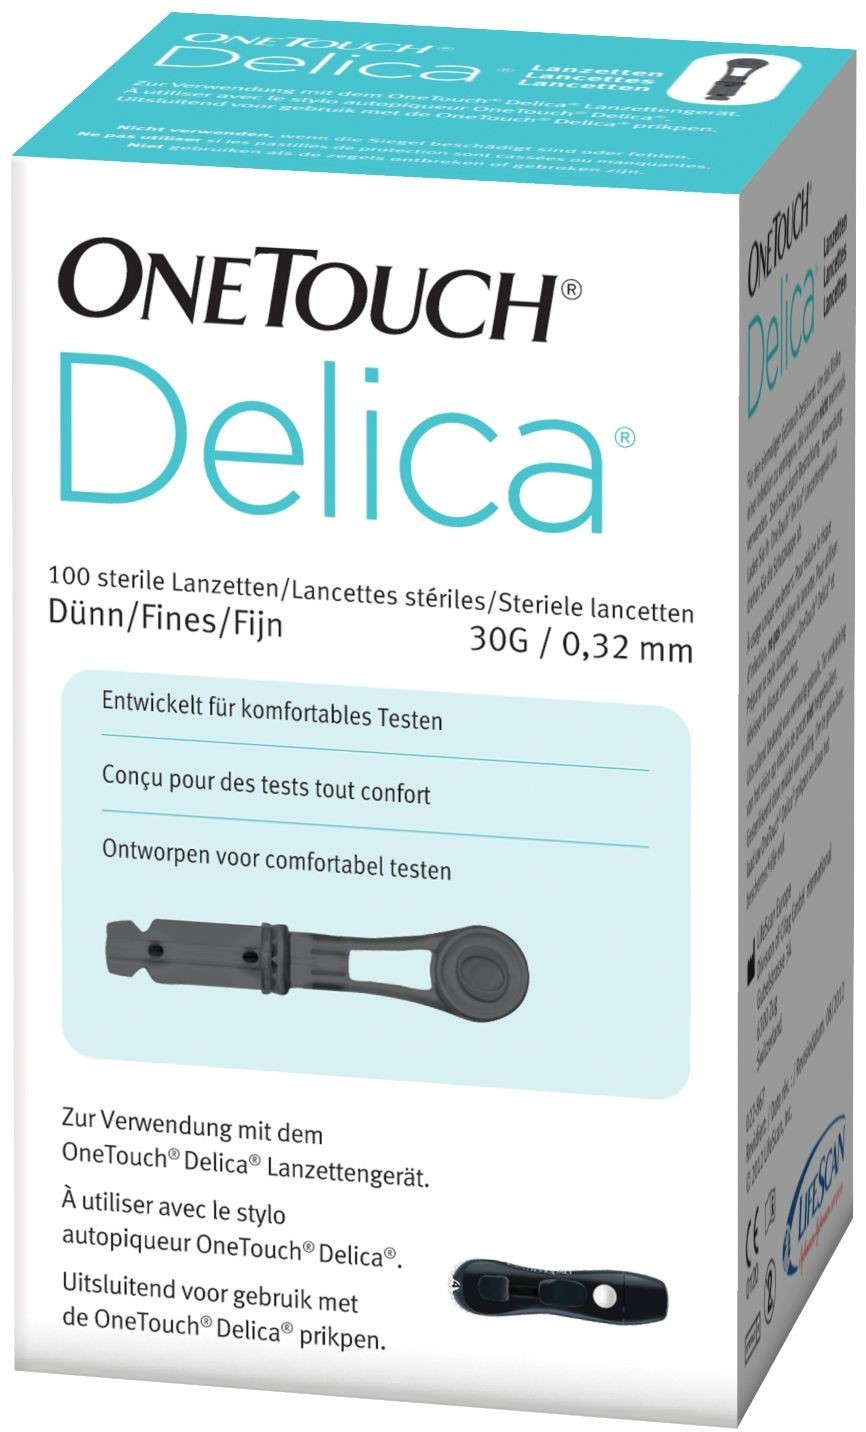 Onetouch delica. Ланцеты one Touch Delica. One Touch Delica Plus. Прокалыватель Bayer Microlet 2 глюкометр. Прокалыватель ONETOUCH Delica иголки к нему.